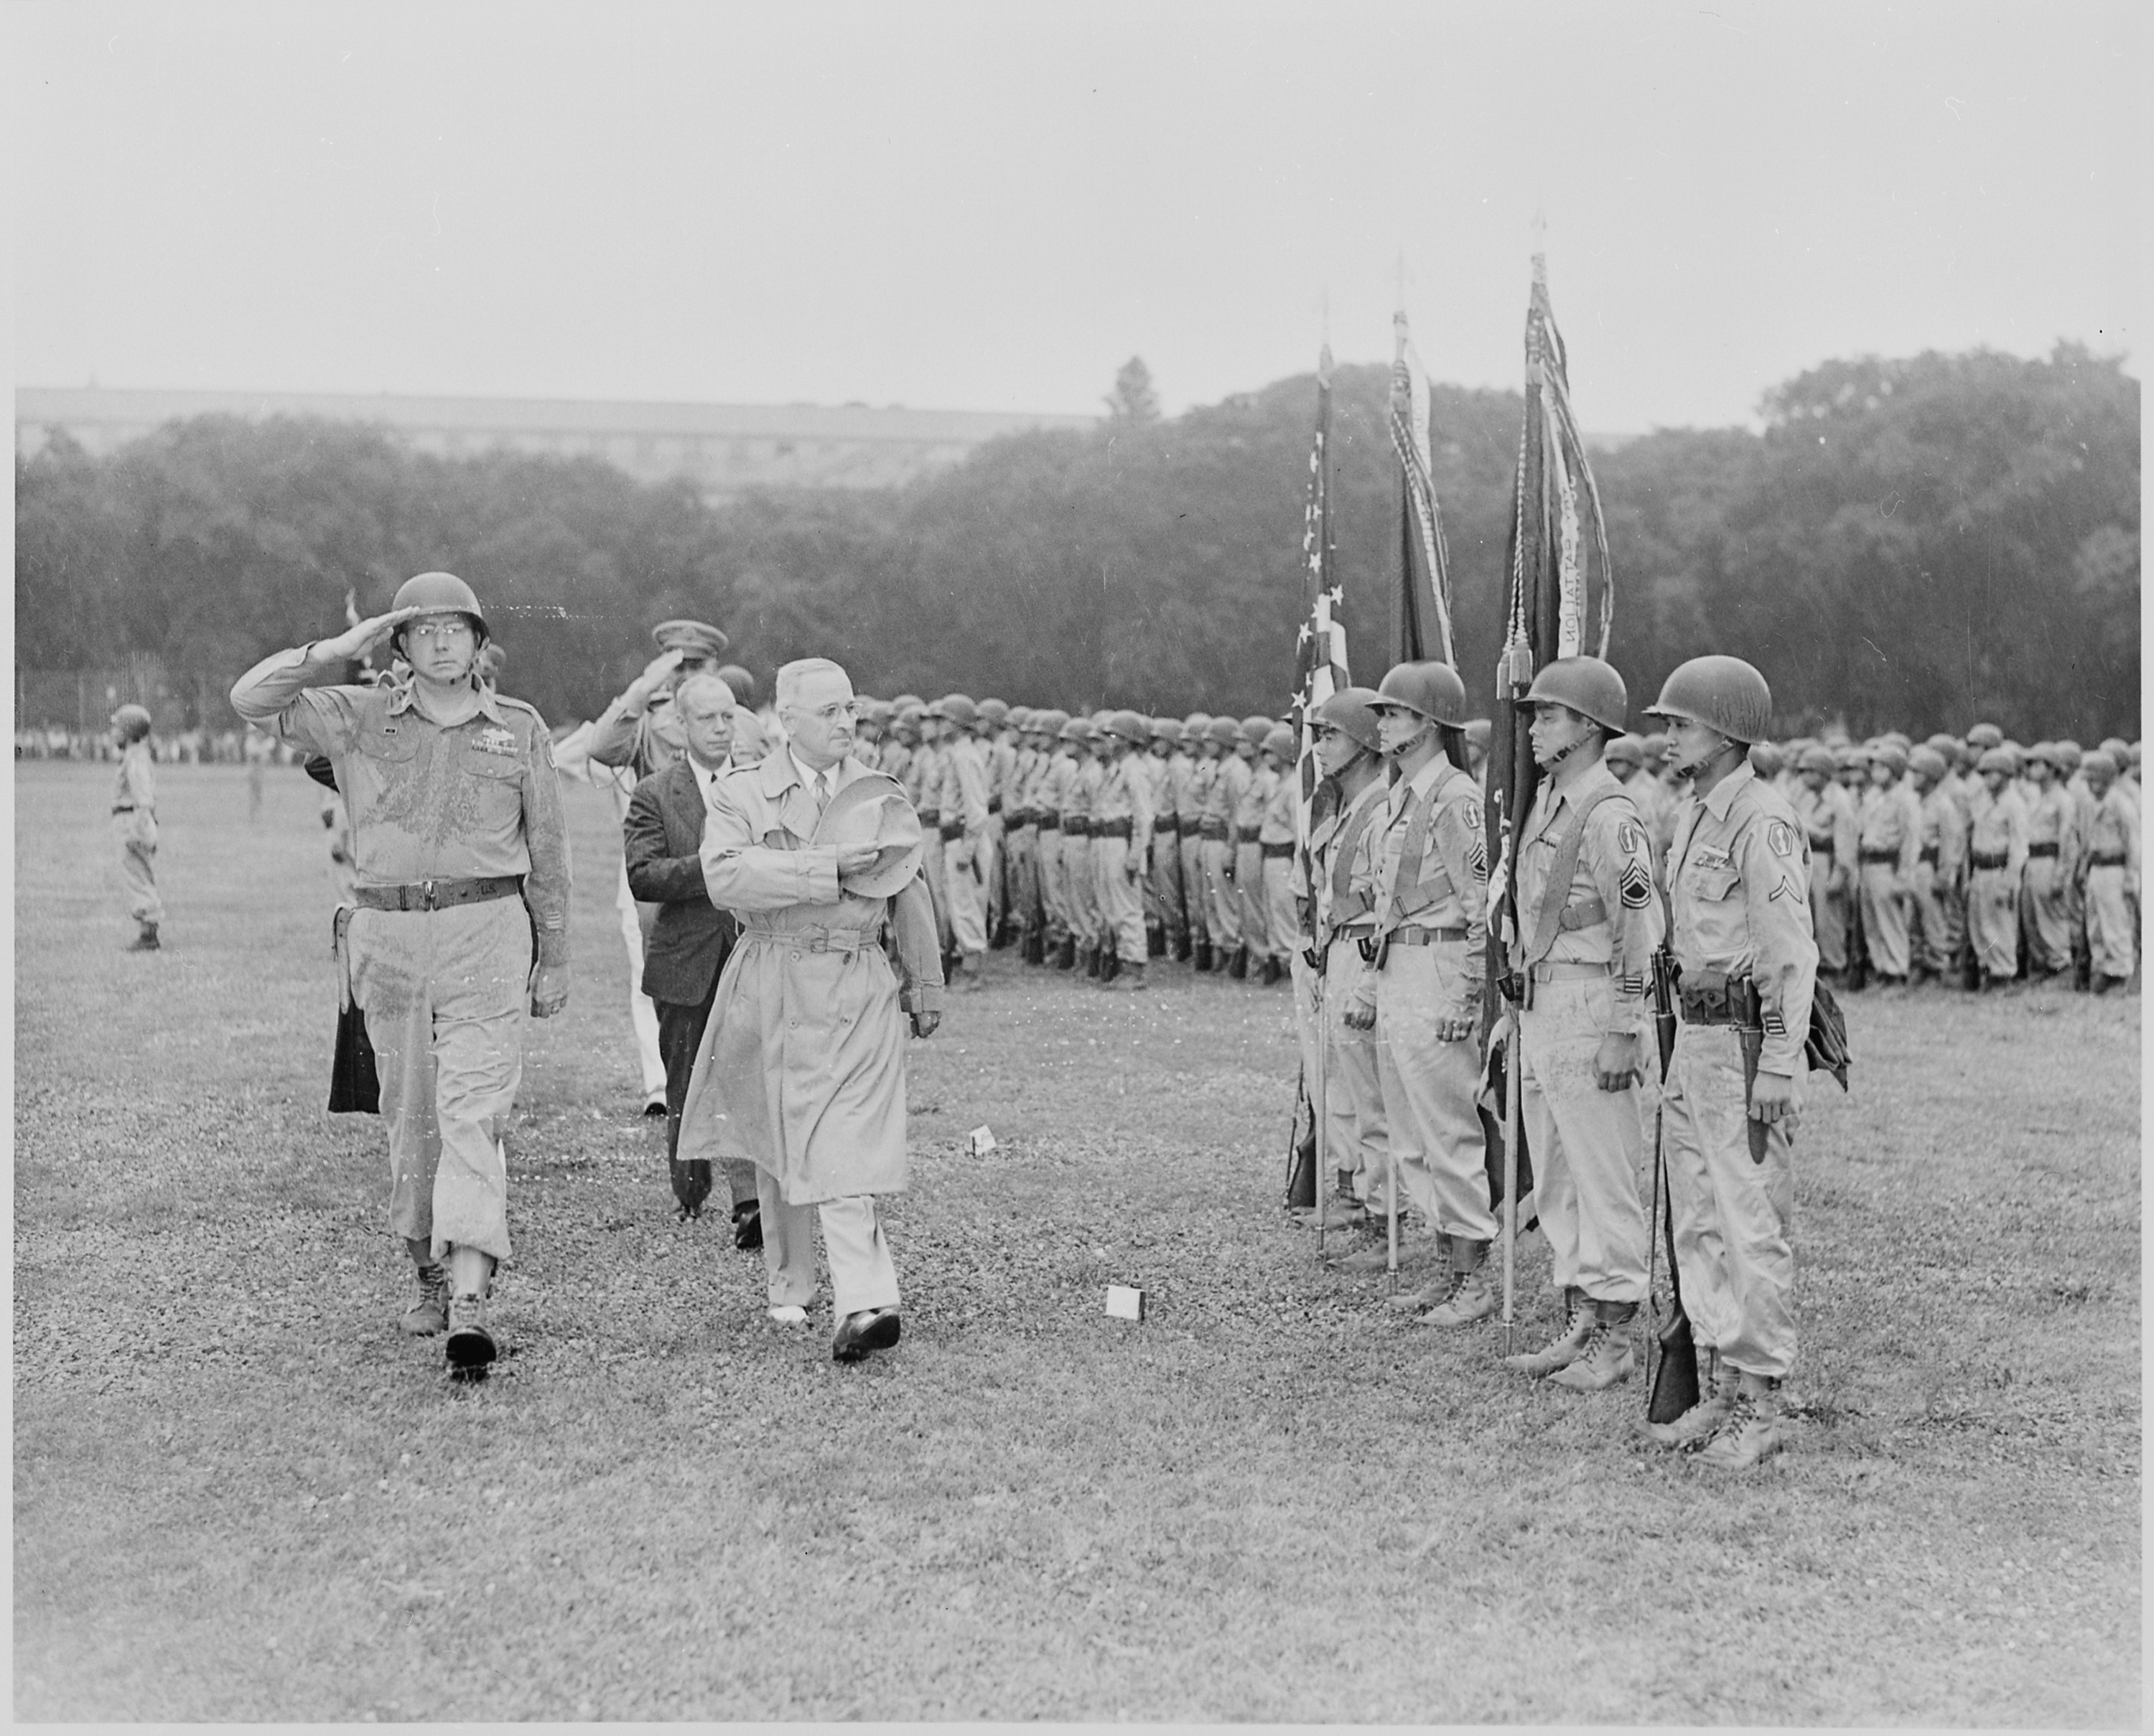 Photograph of President Truman reviewing the Japanese-American 442nd